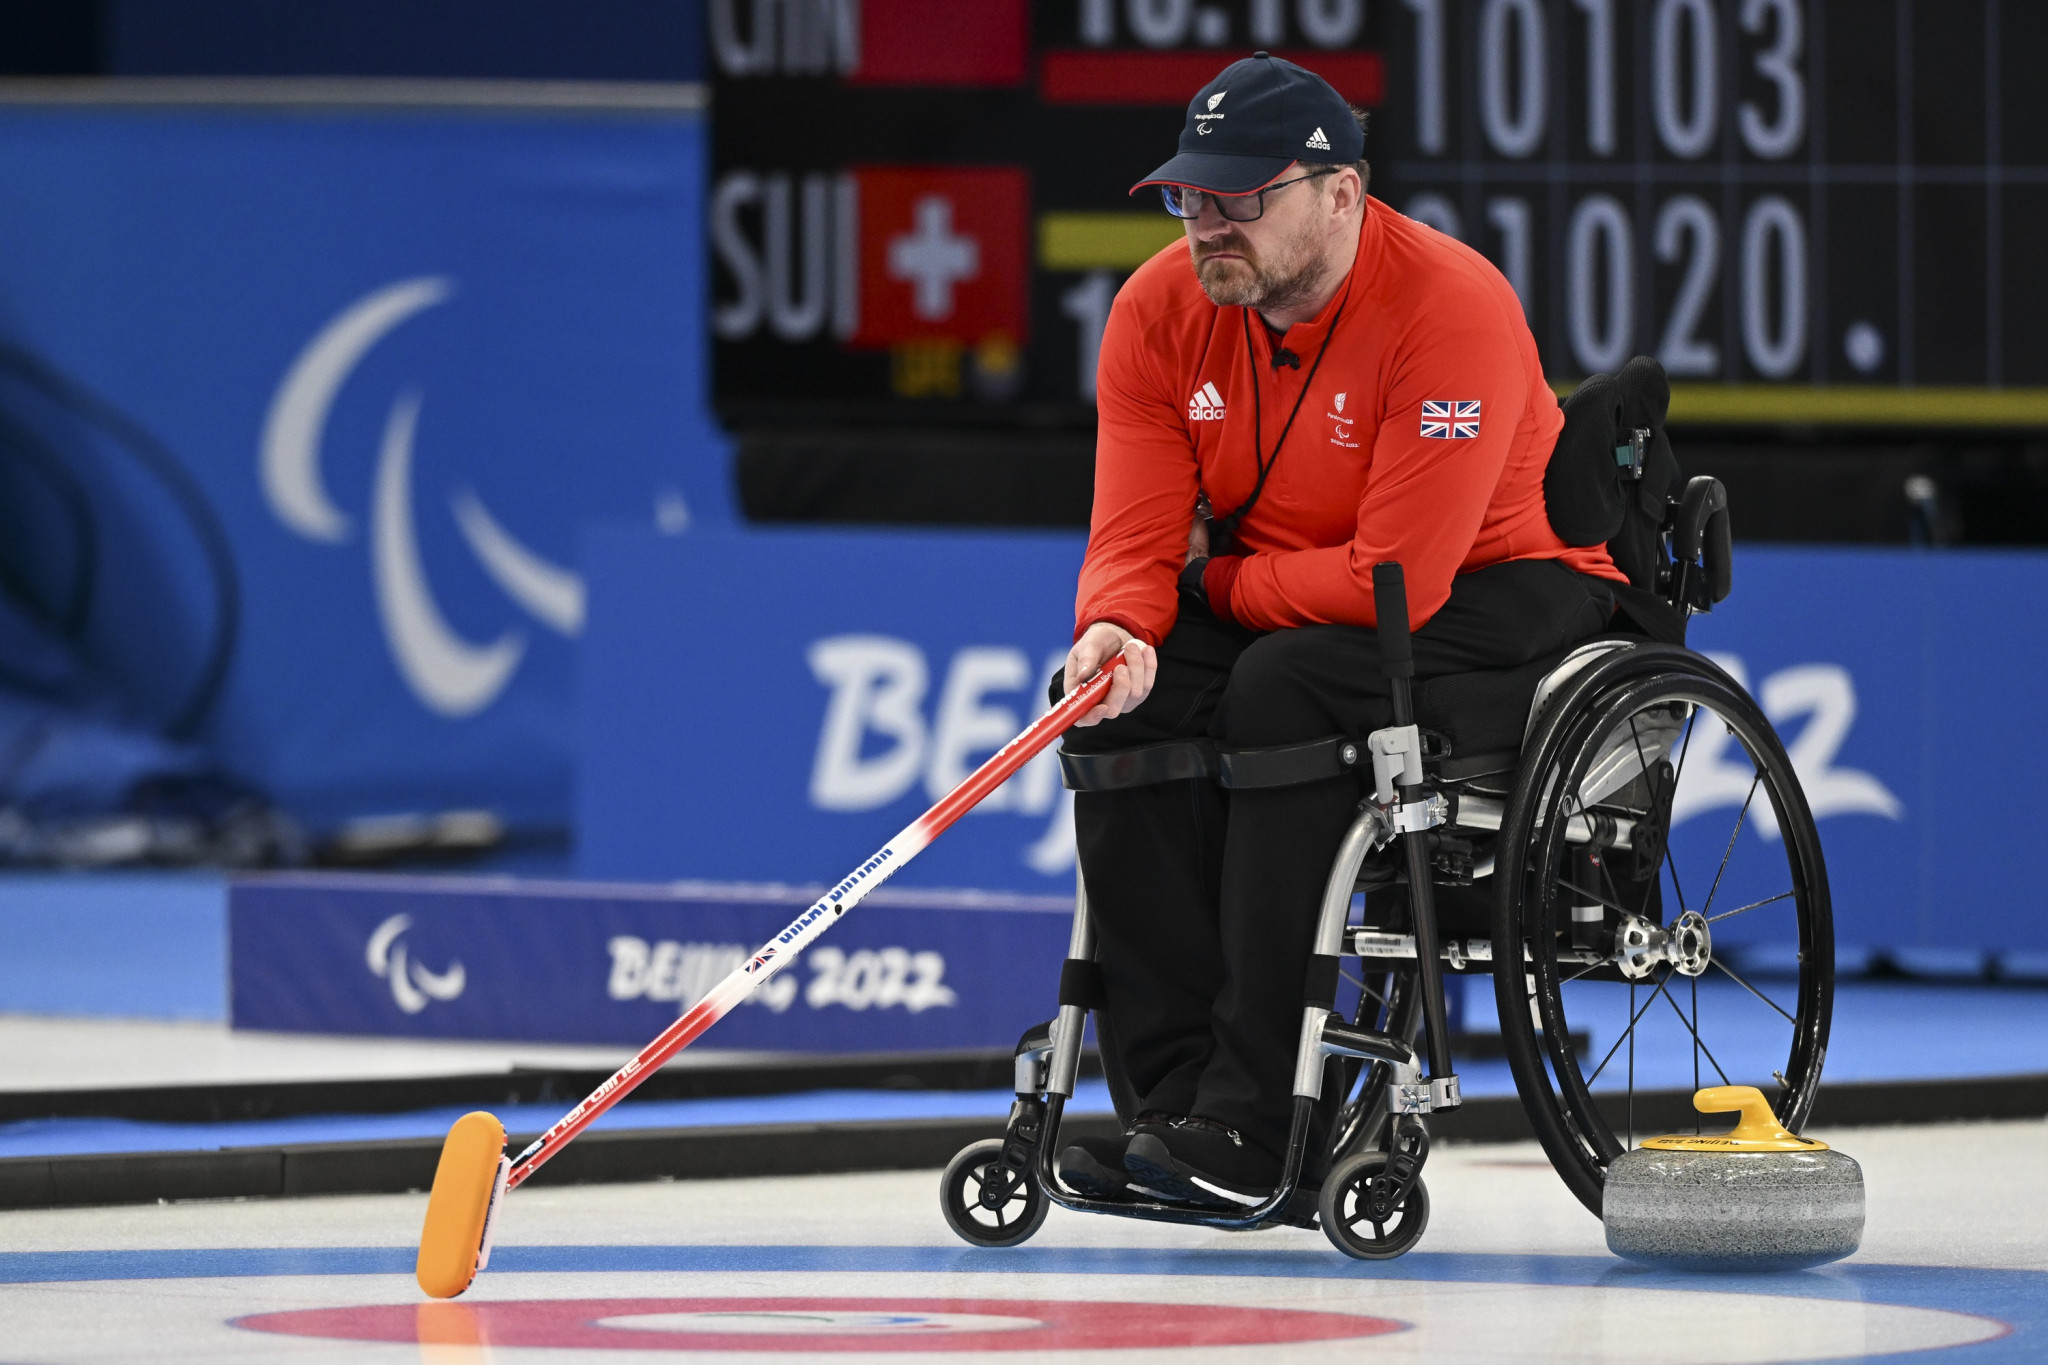 European Paralympic Committee President Raymon Blondel admits holding wheelchair curling as part of a multi-sport event might be 